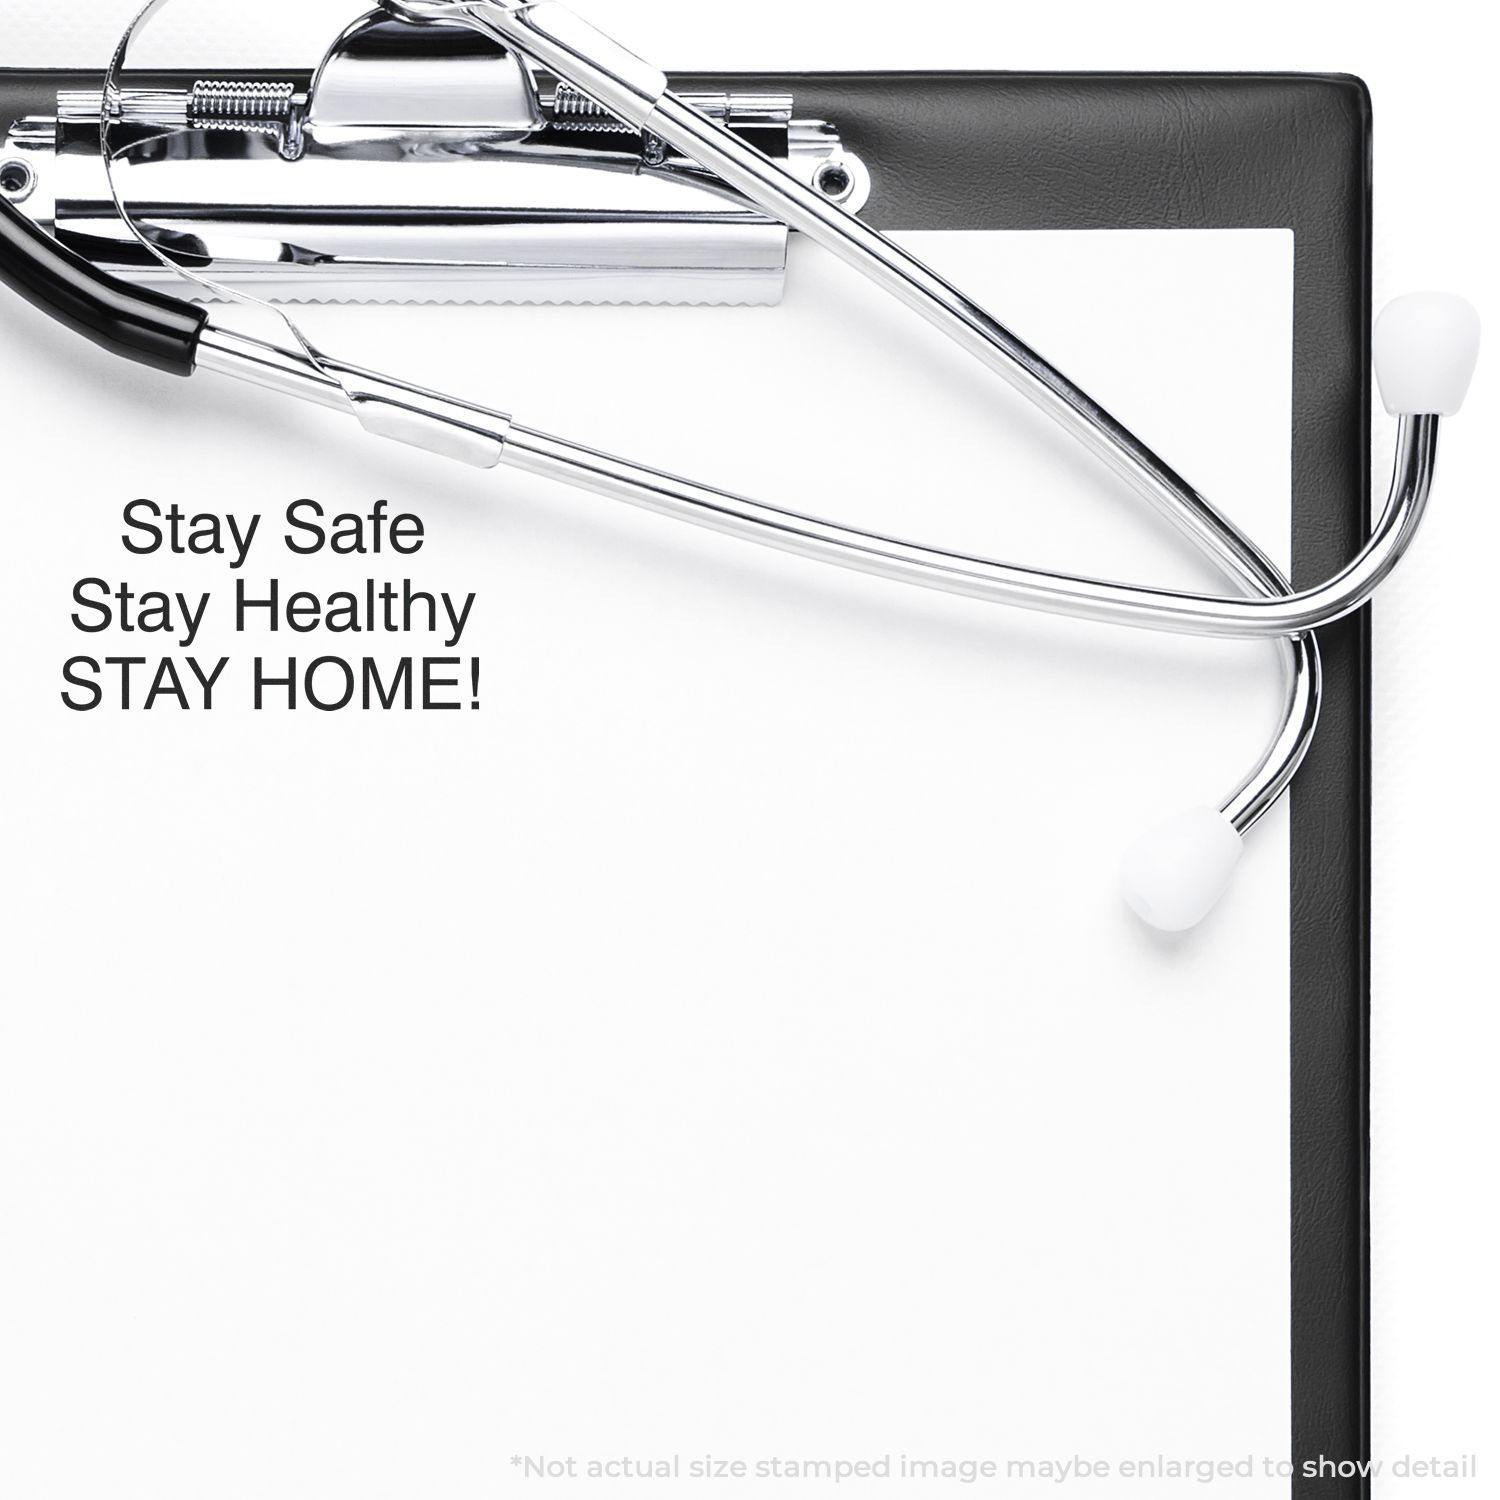 In Use Slim Pre-Inked Stay Safe Stay Healthy Stamp Image